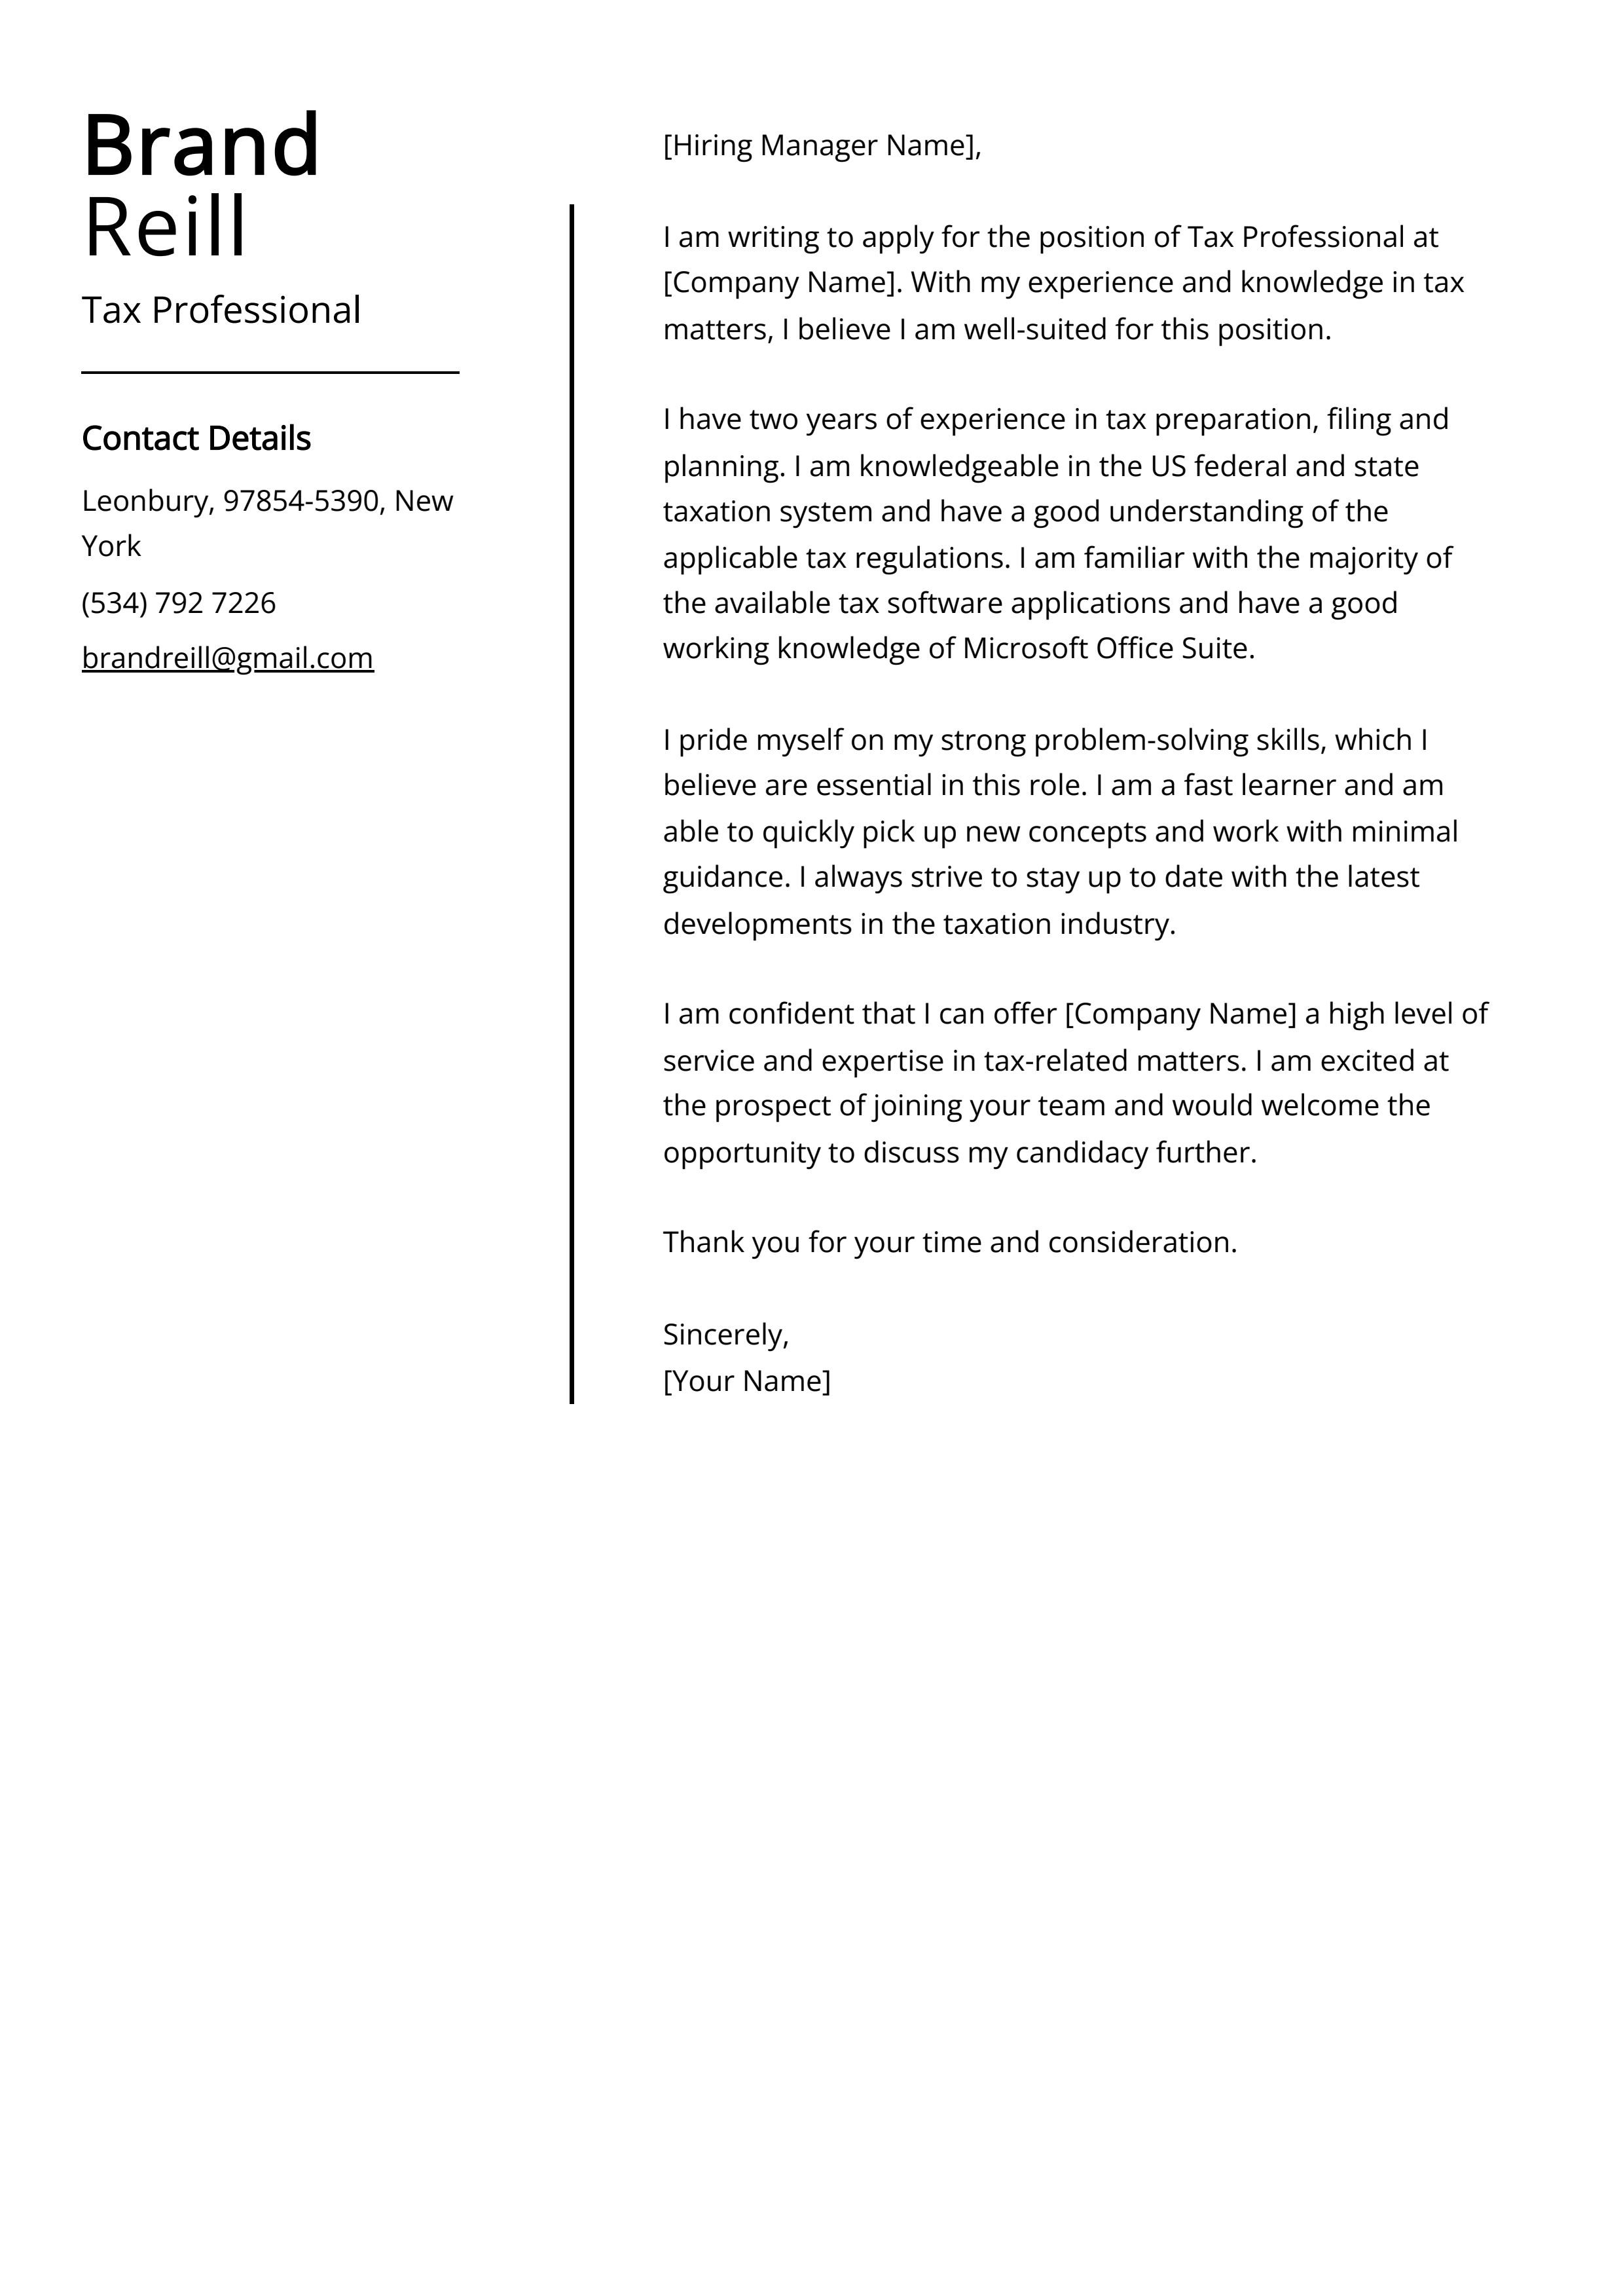 Tax Professional Cover Letter Example